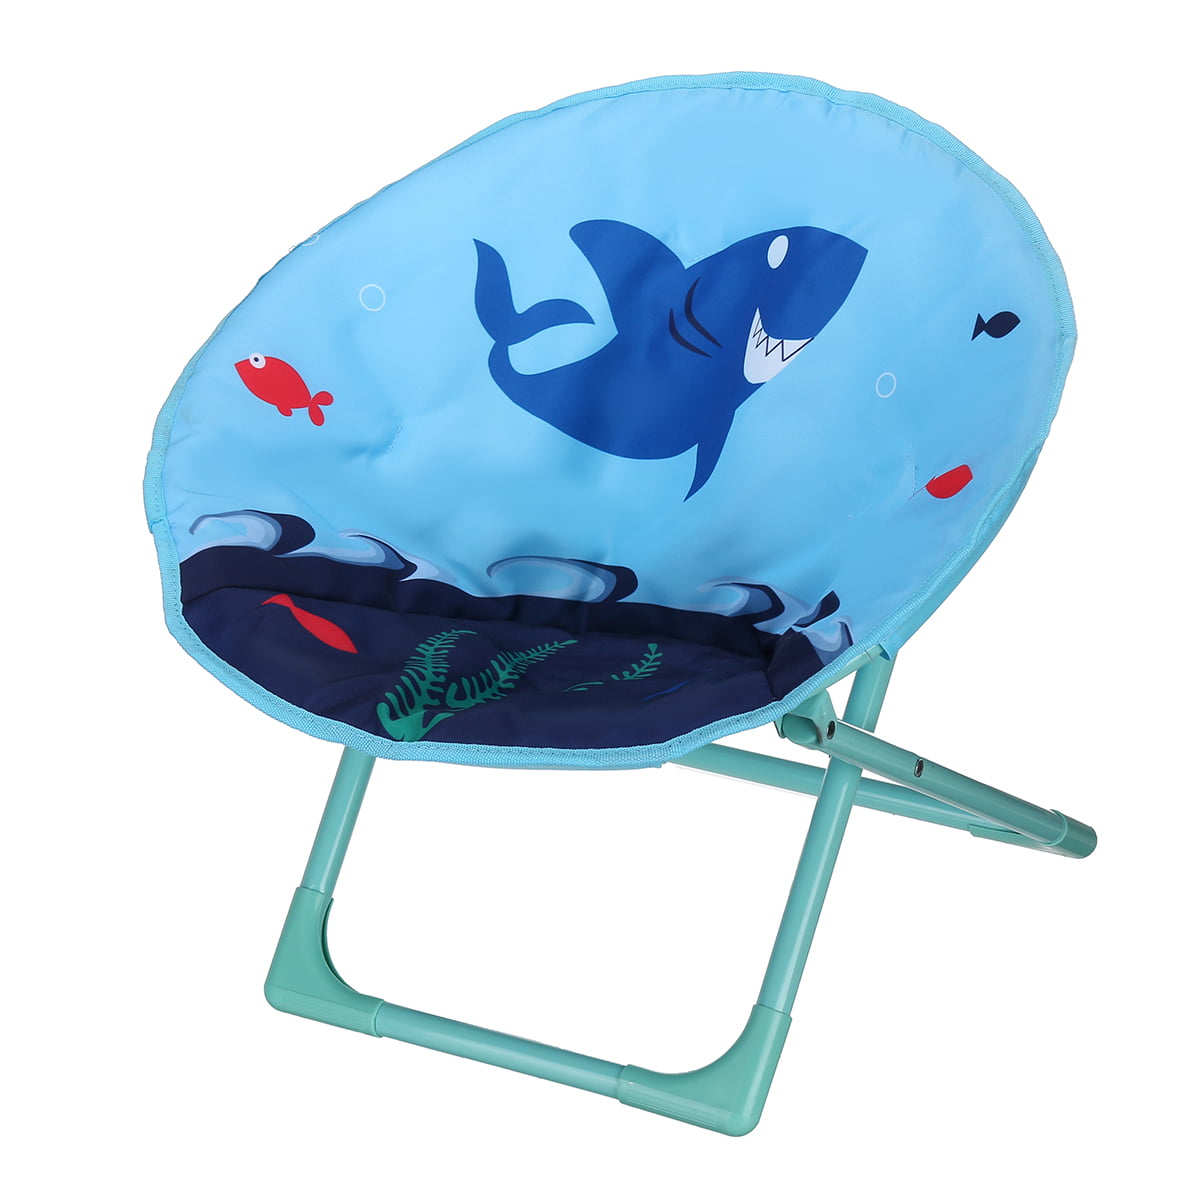 Comfortable Kids Folding Moon Chair for Indoor and Outdoor Cute Bottom Fish Design Chair for Children 